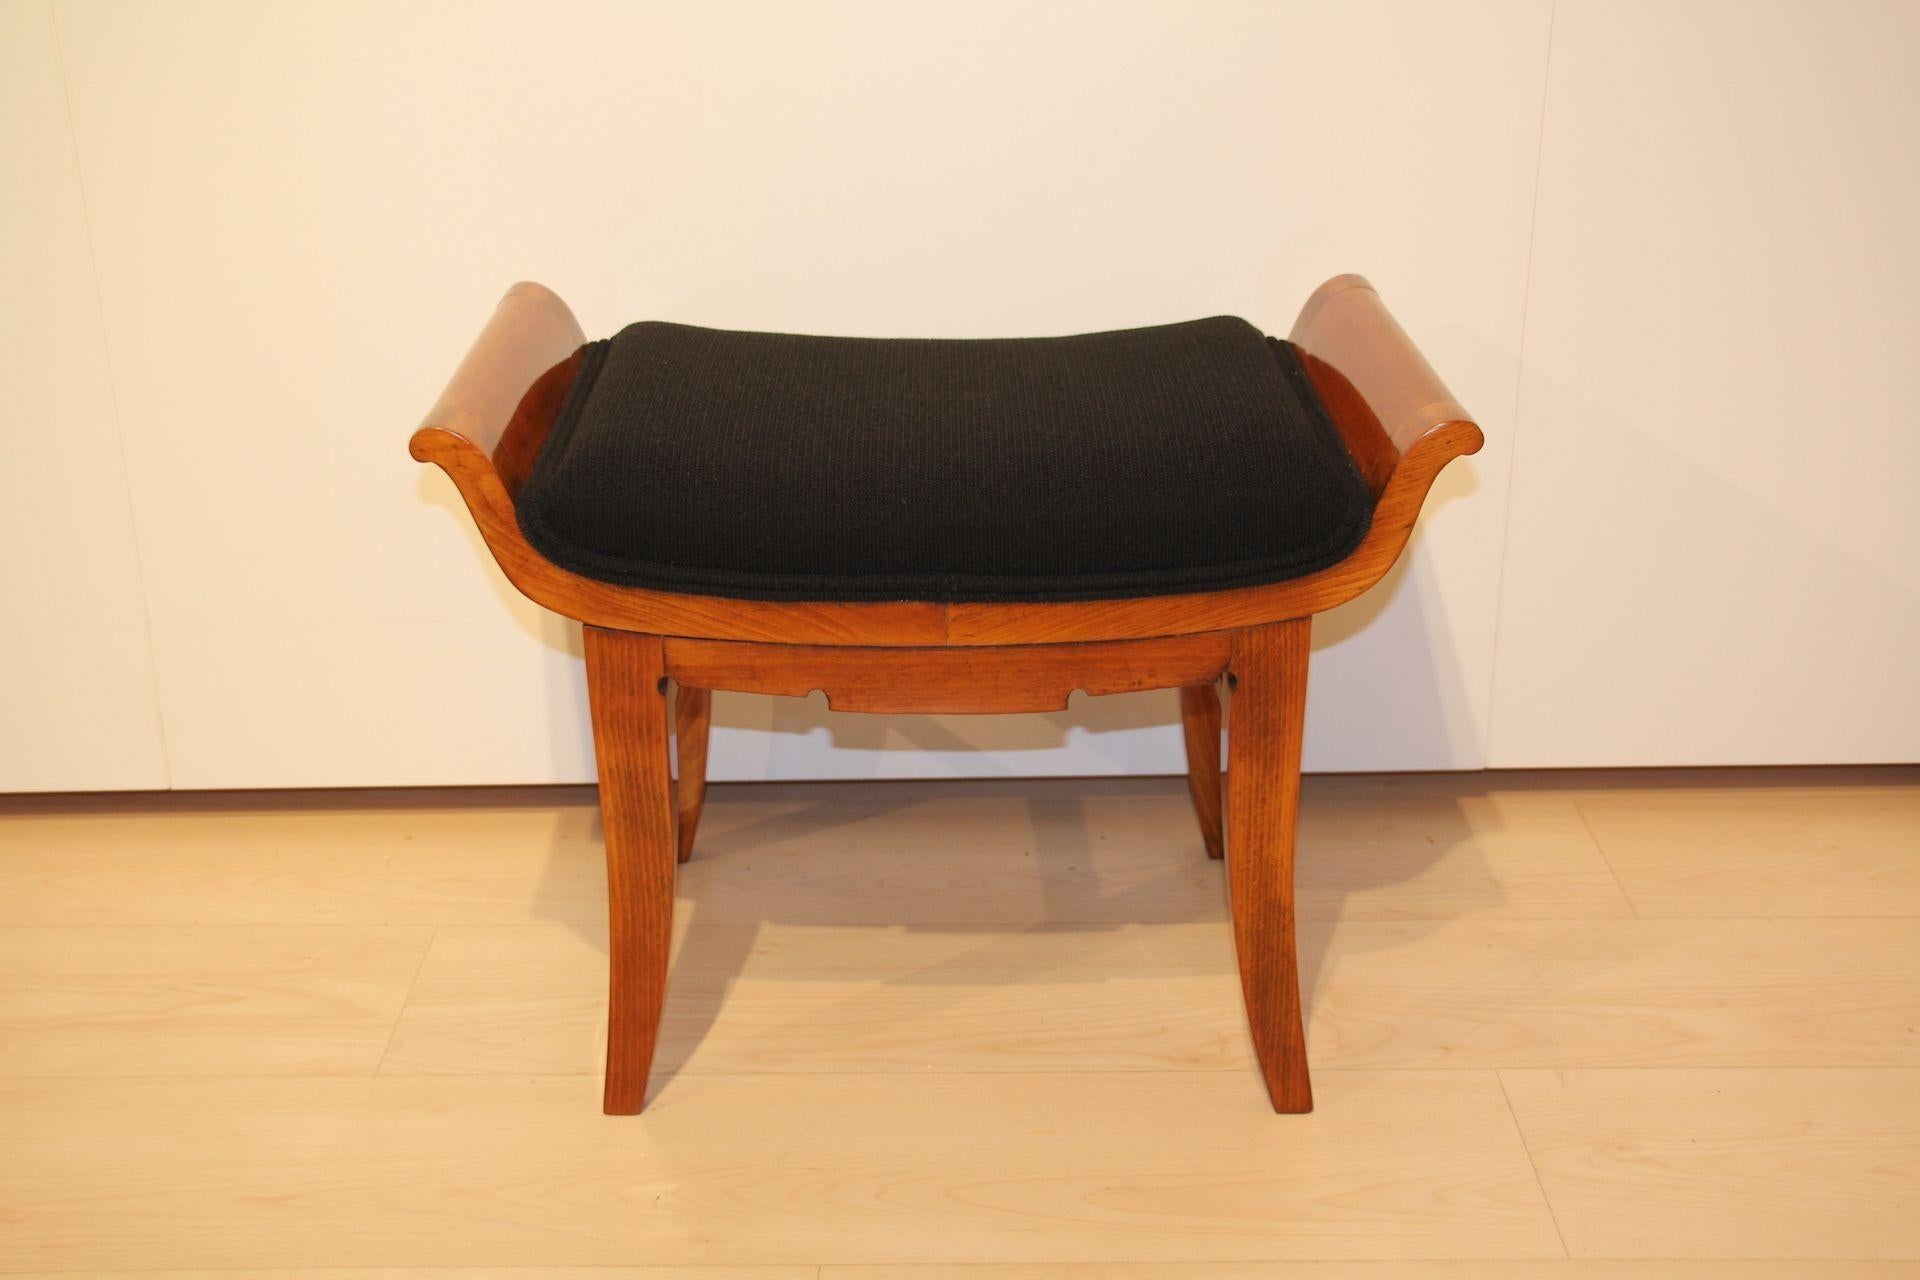 Small Biedermeier stool from Vienna, Austria circa 1850.
Beech solid wood, shellac hand polished. Newly upholstered with black textured fabric.
Dimensions: H 44 cm x W 58,5 cm x D 34 cm x Seat-H 41 cm.